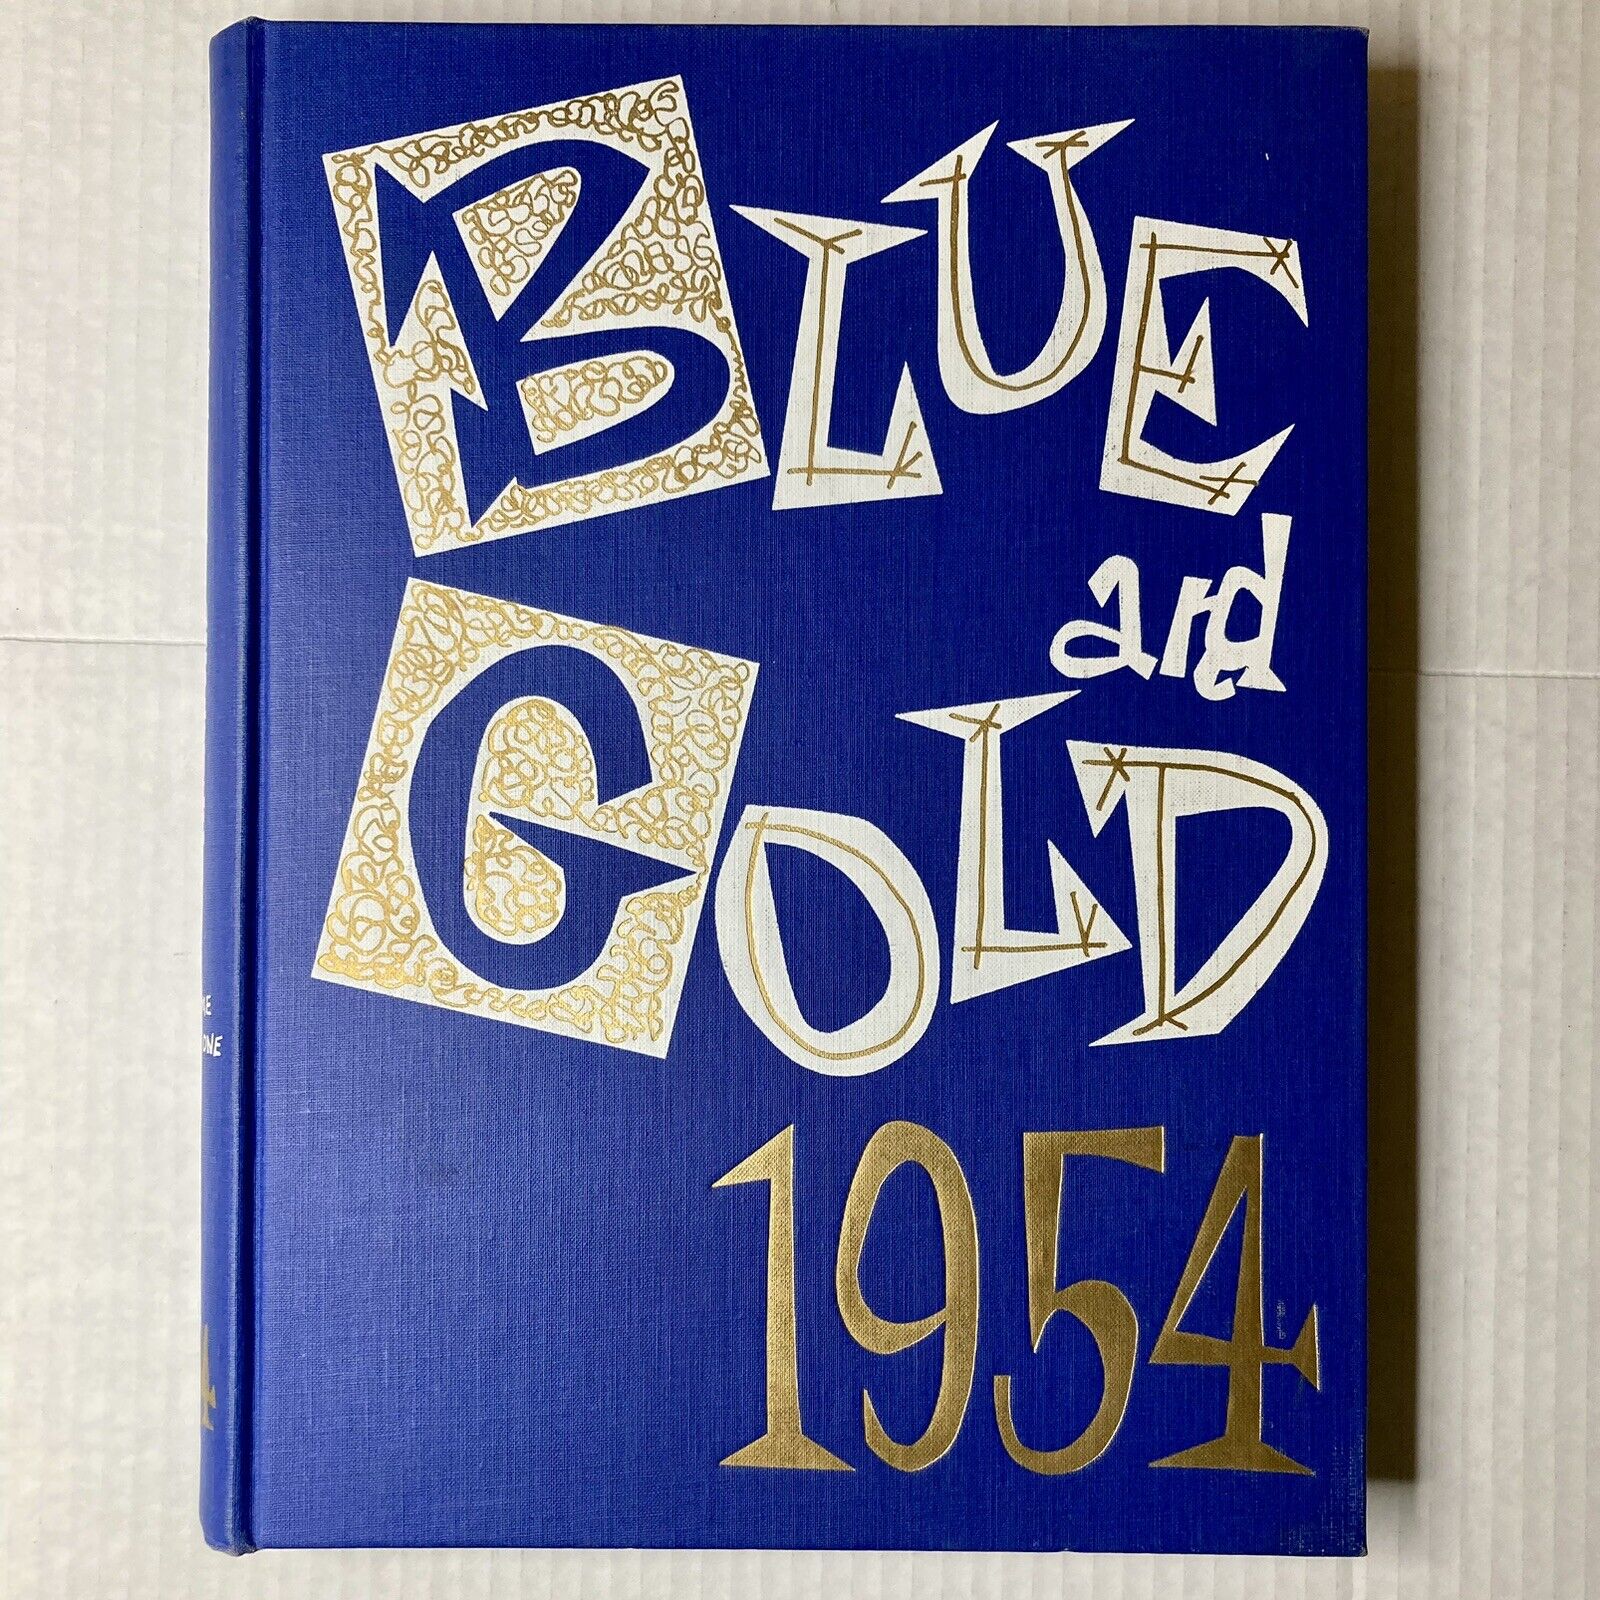 1954 University of California Blue and Gold Yearbook Hardcover Vol. 81 Original